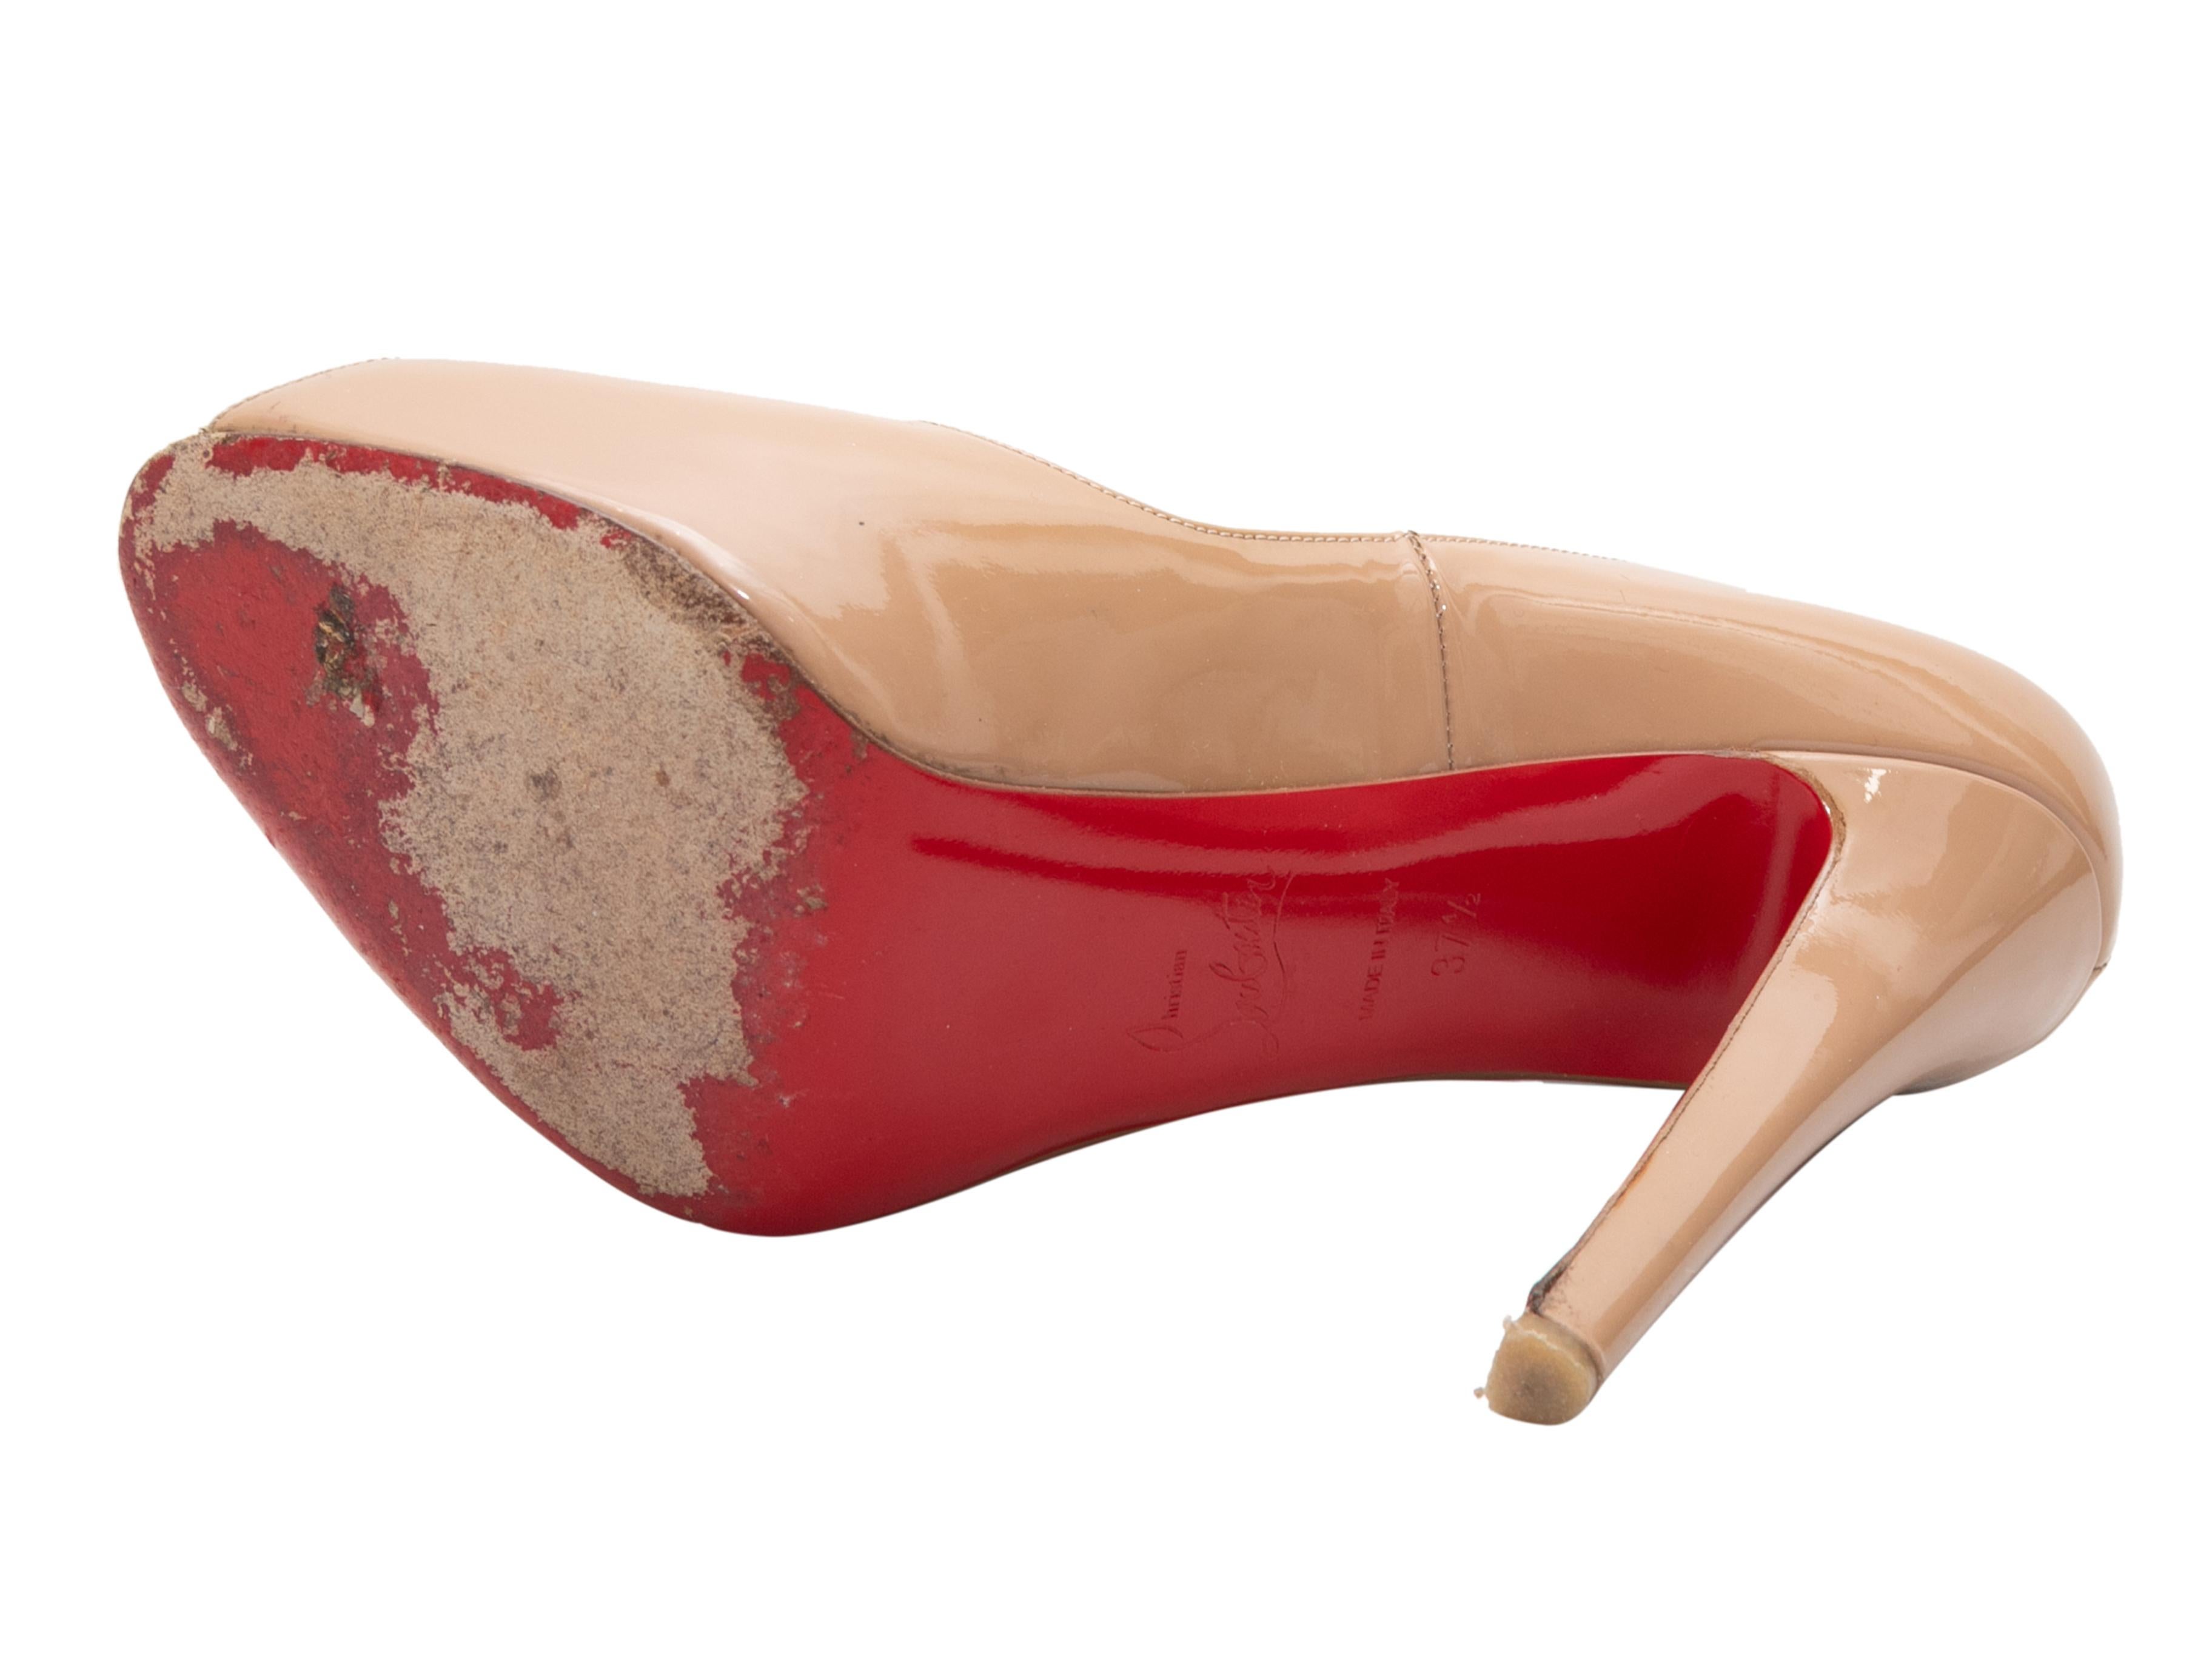 Beige patent leather peep-toe pumps by Christian Louboutin. 4.75